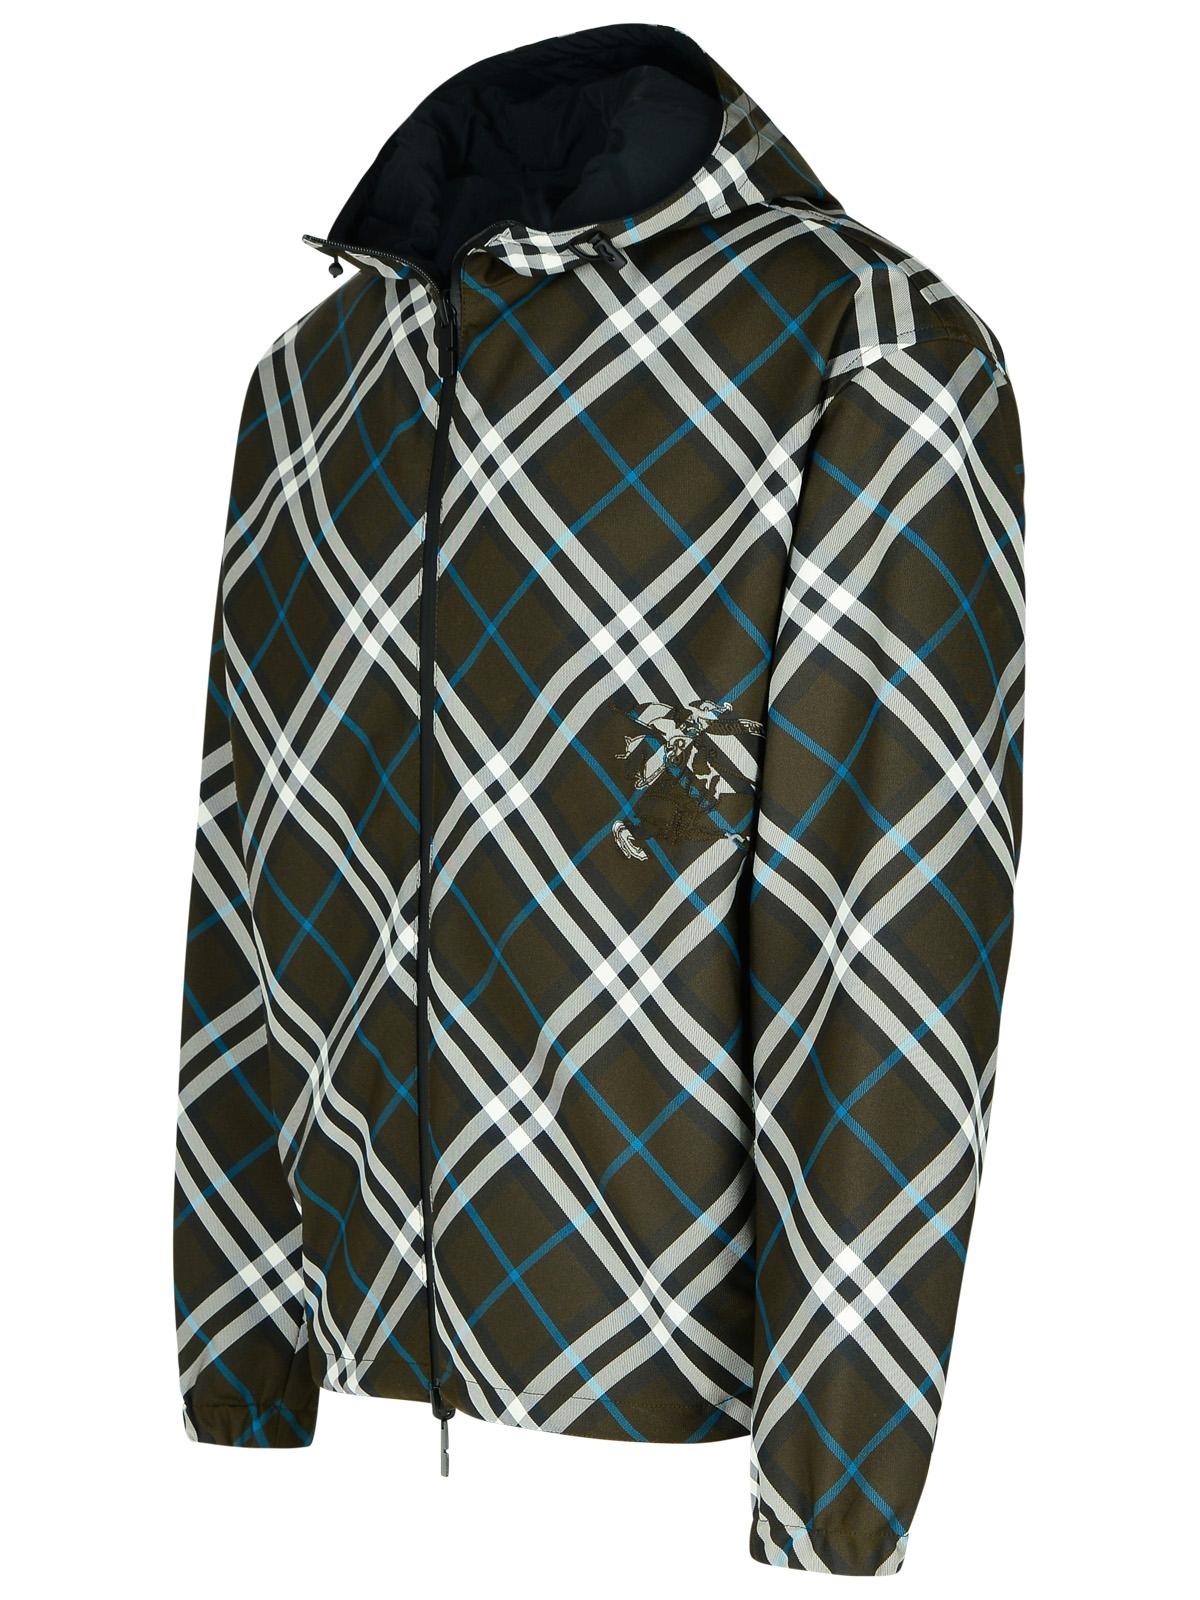 Burberry 'Check' Reversible Green Polyester Jacket - 2